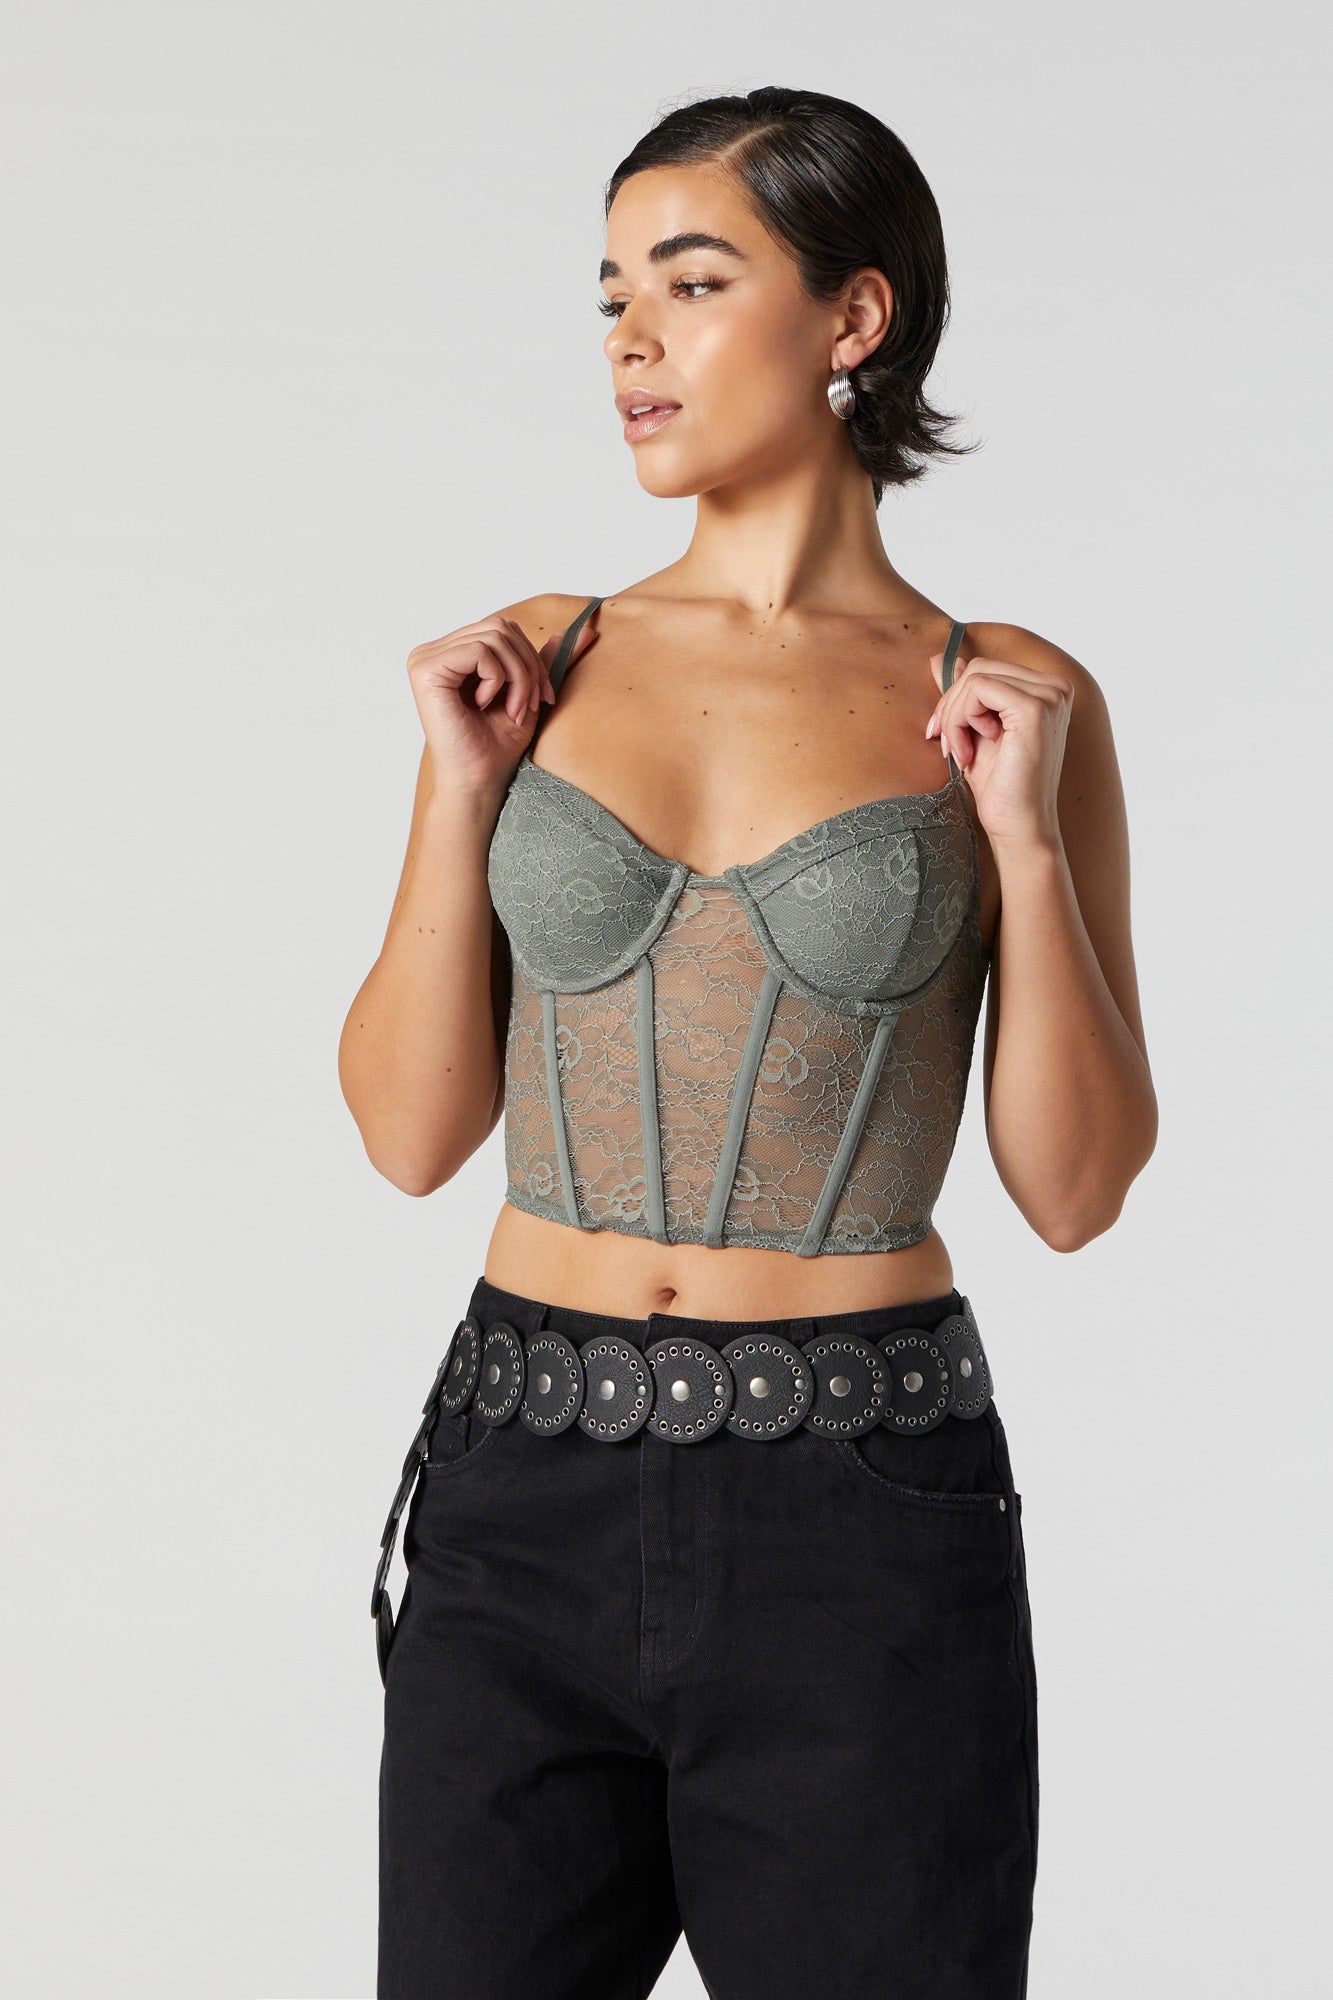 HERMITAKH - Lace Bustier Top